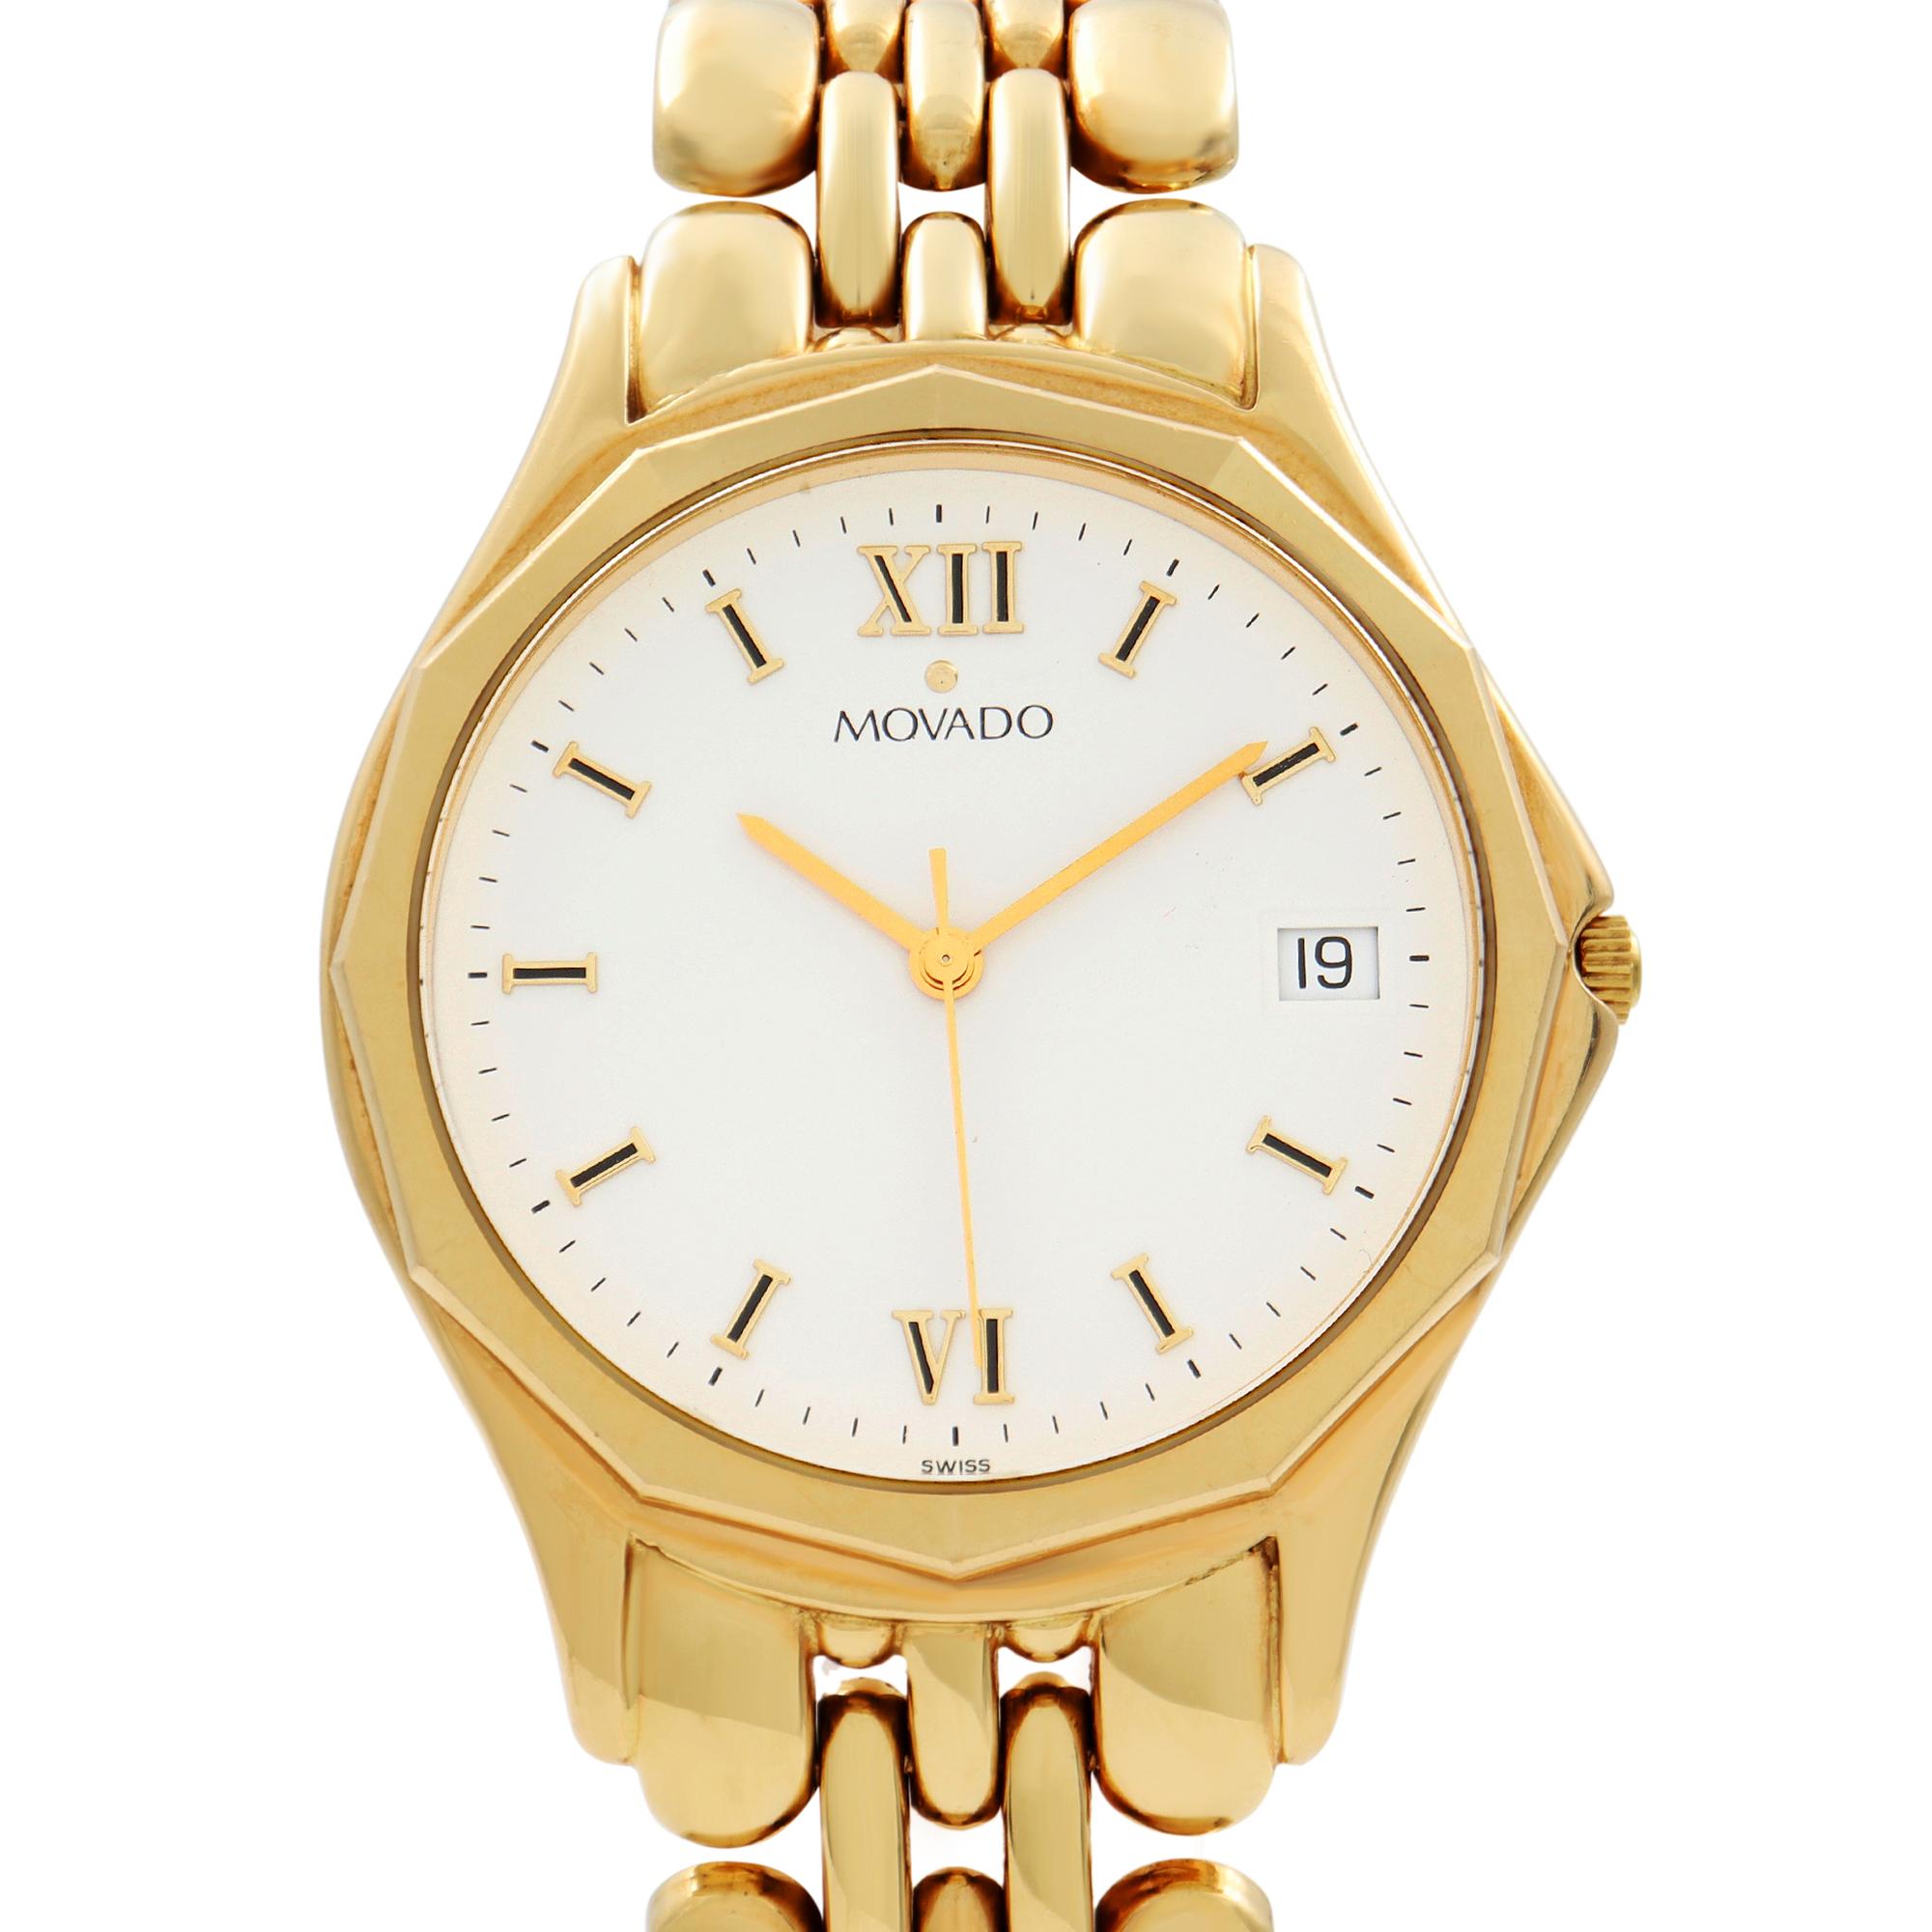 Pre-owned Movado 14k Yellow Gold White Roman Dial Quartz Ladies Watch. No Original Box and Papers are Included. Comes with Chronostore Presentation Box and Authenticity Card. Covered by 1-year Chronostore Warranty.
Details:
Brand Movado
Department